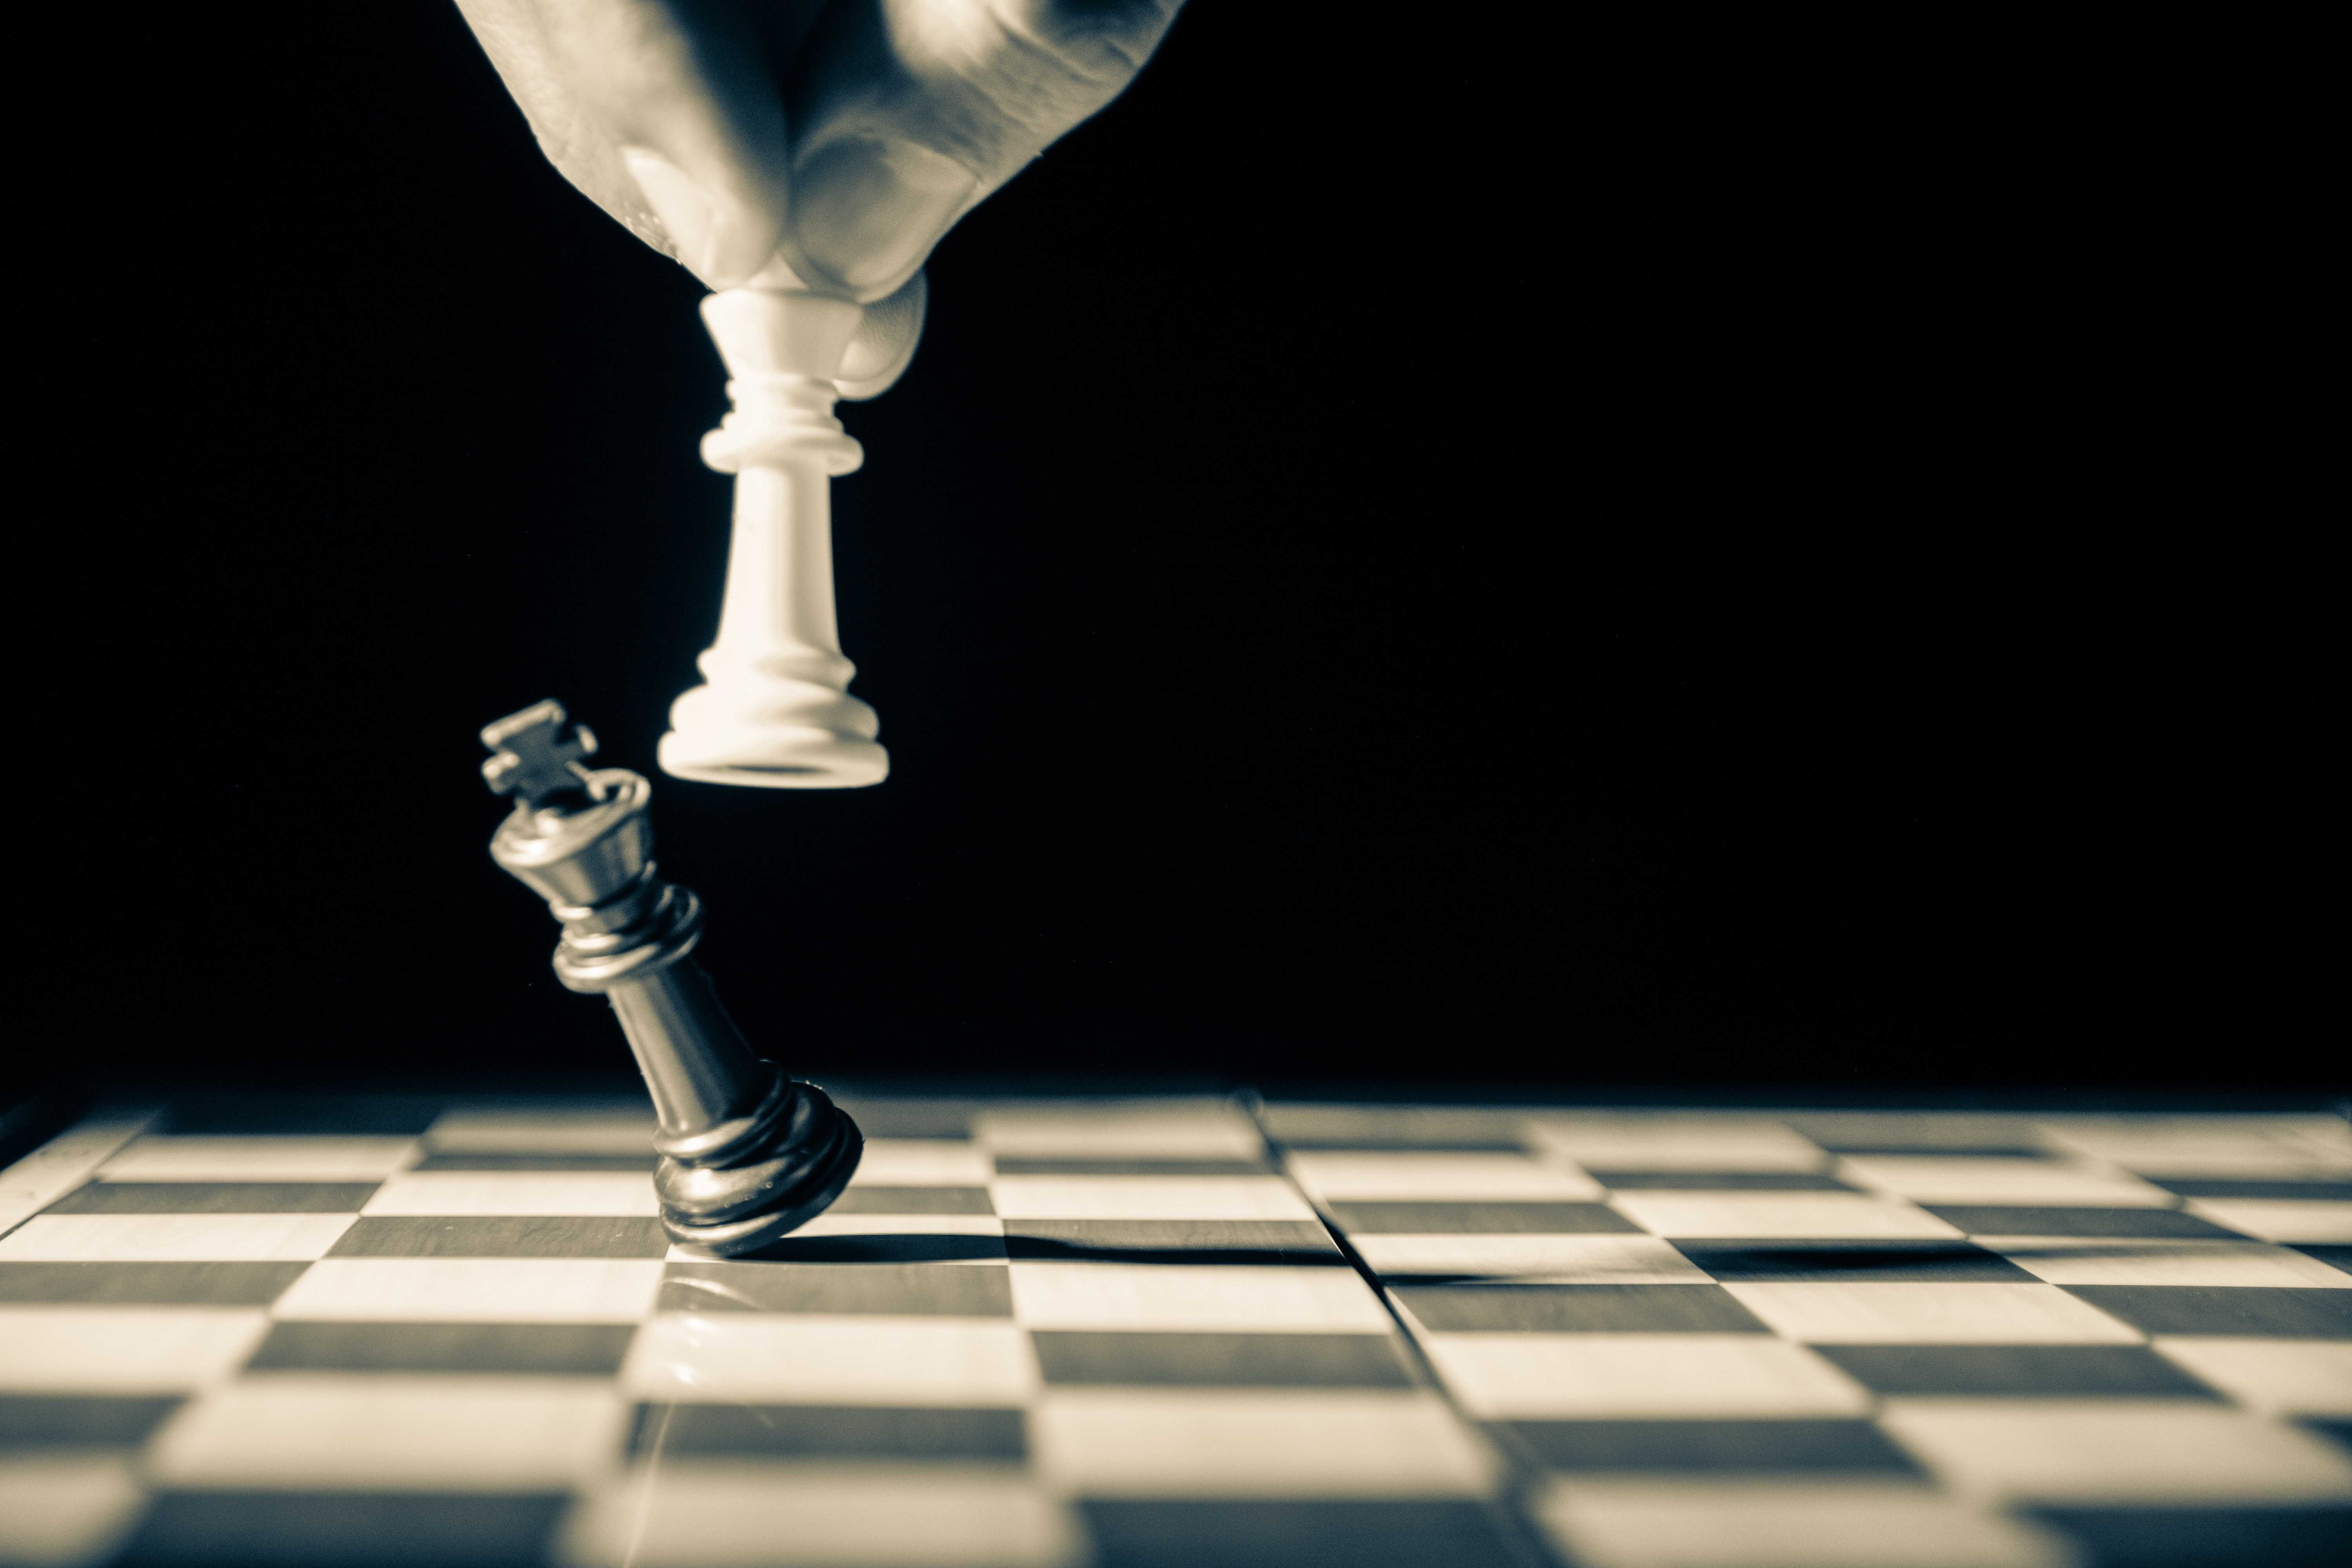 Photo of a check mate in a game of chess